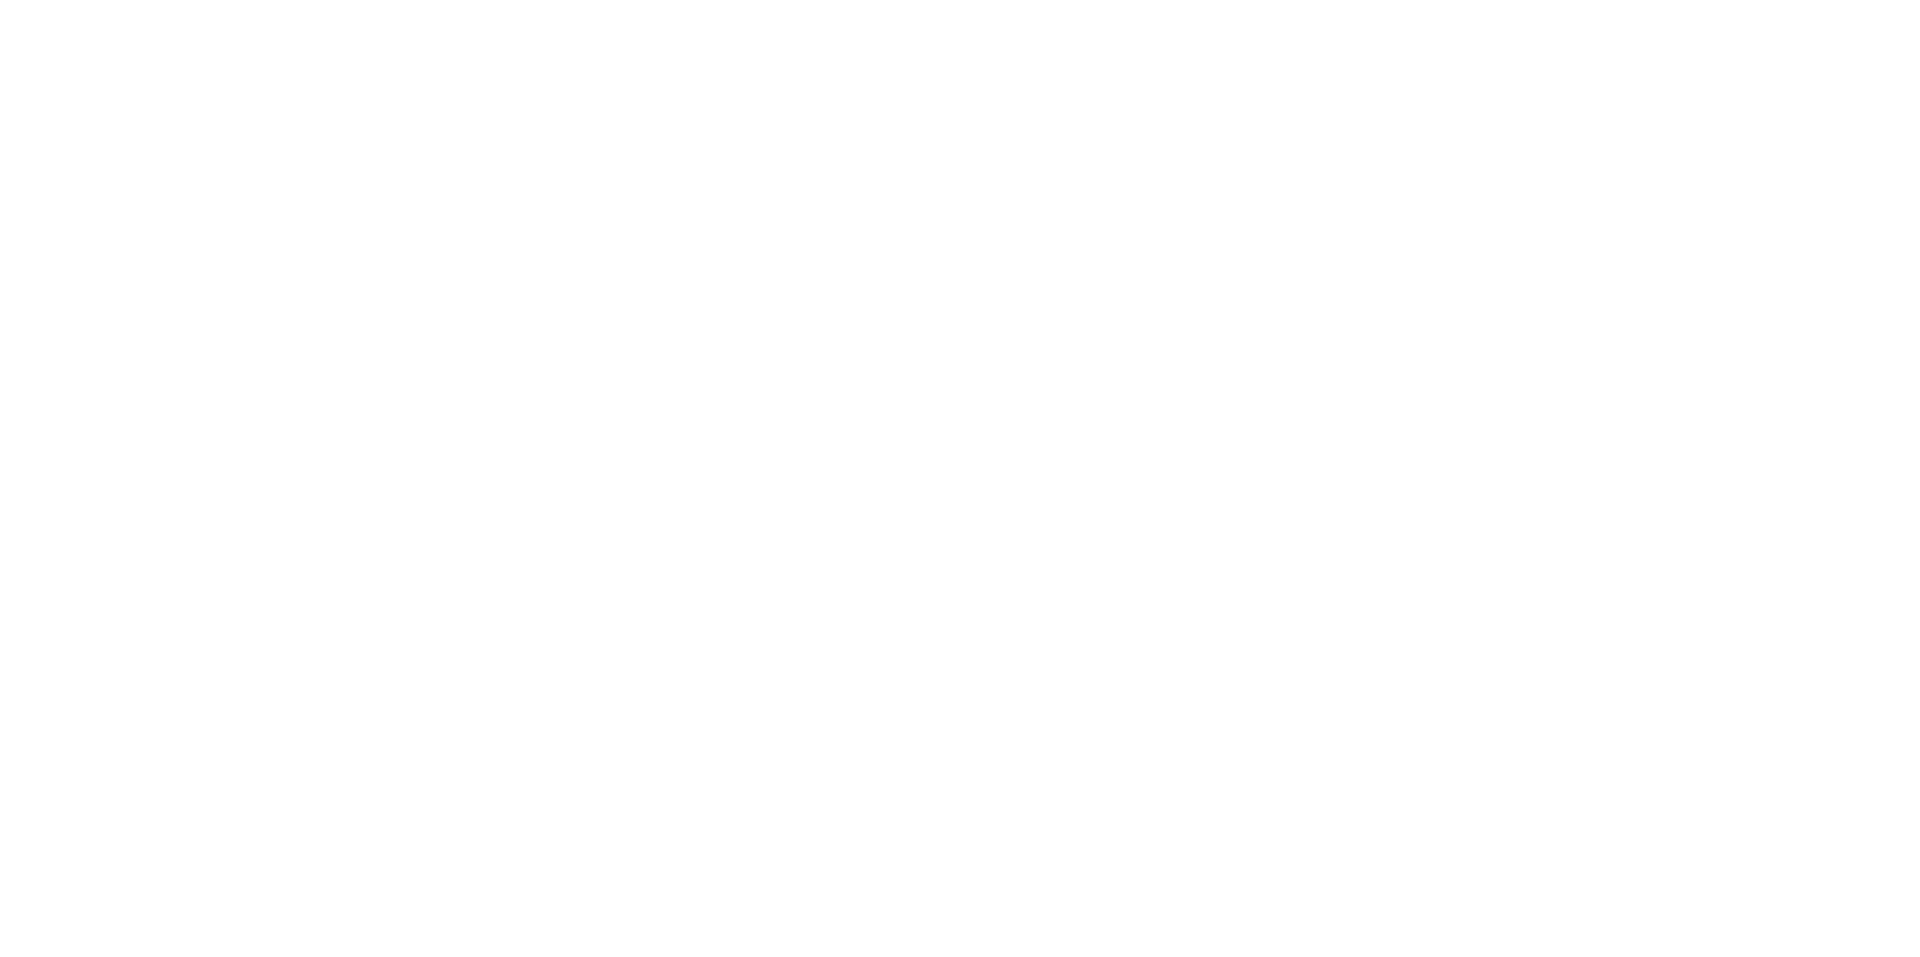 Journey Memorial Chapel Funeral and Cremation Services Logo